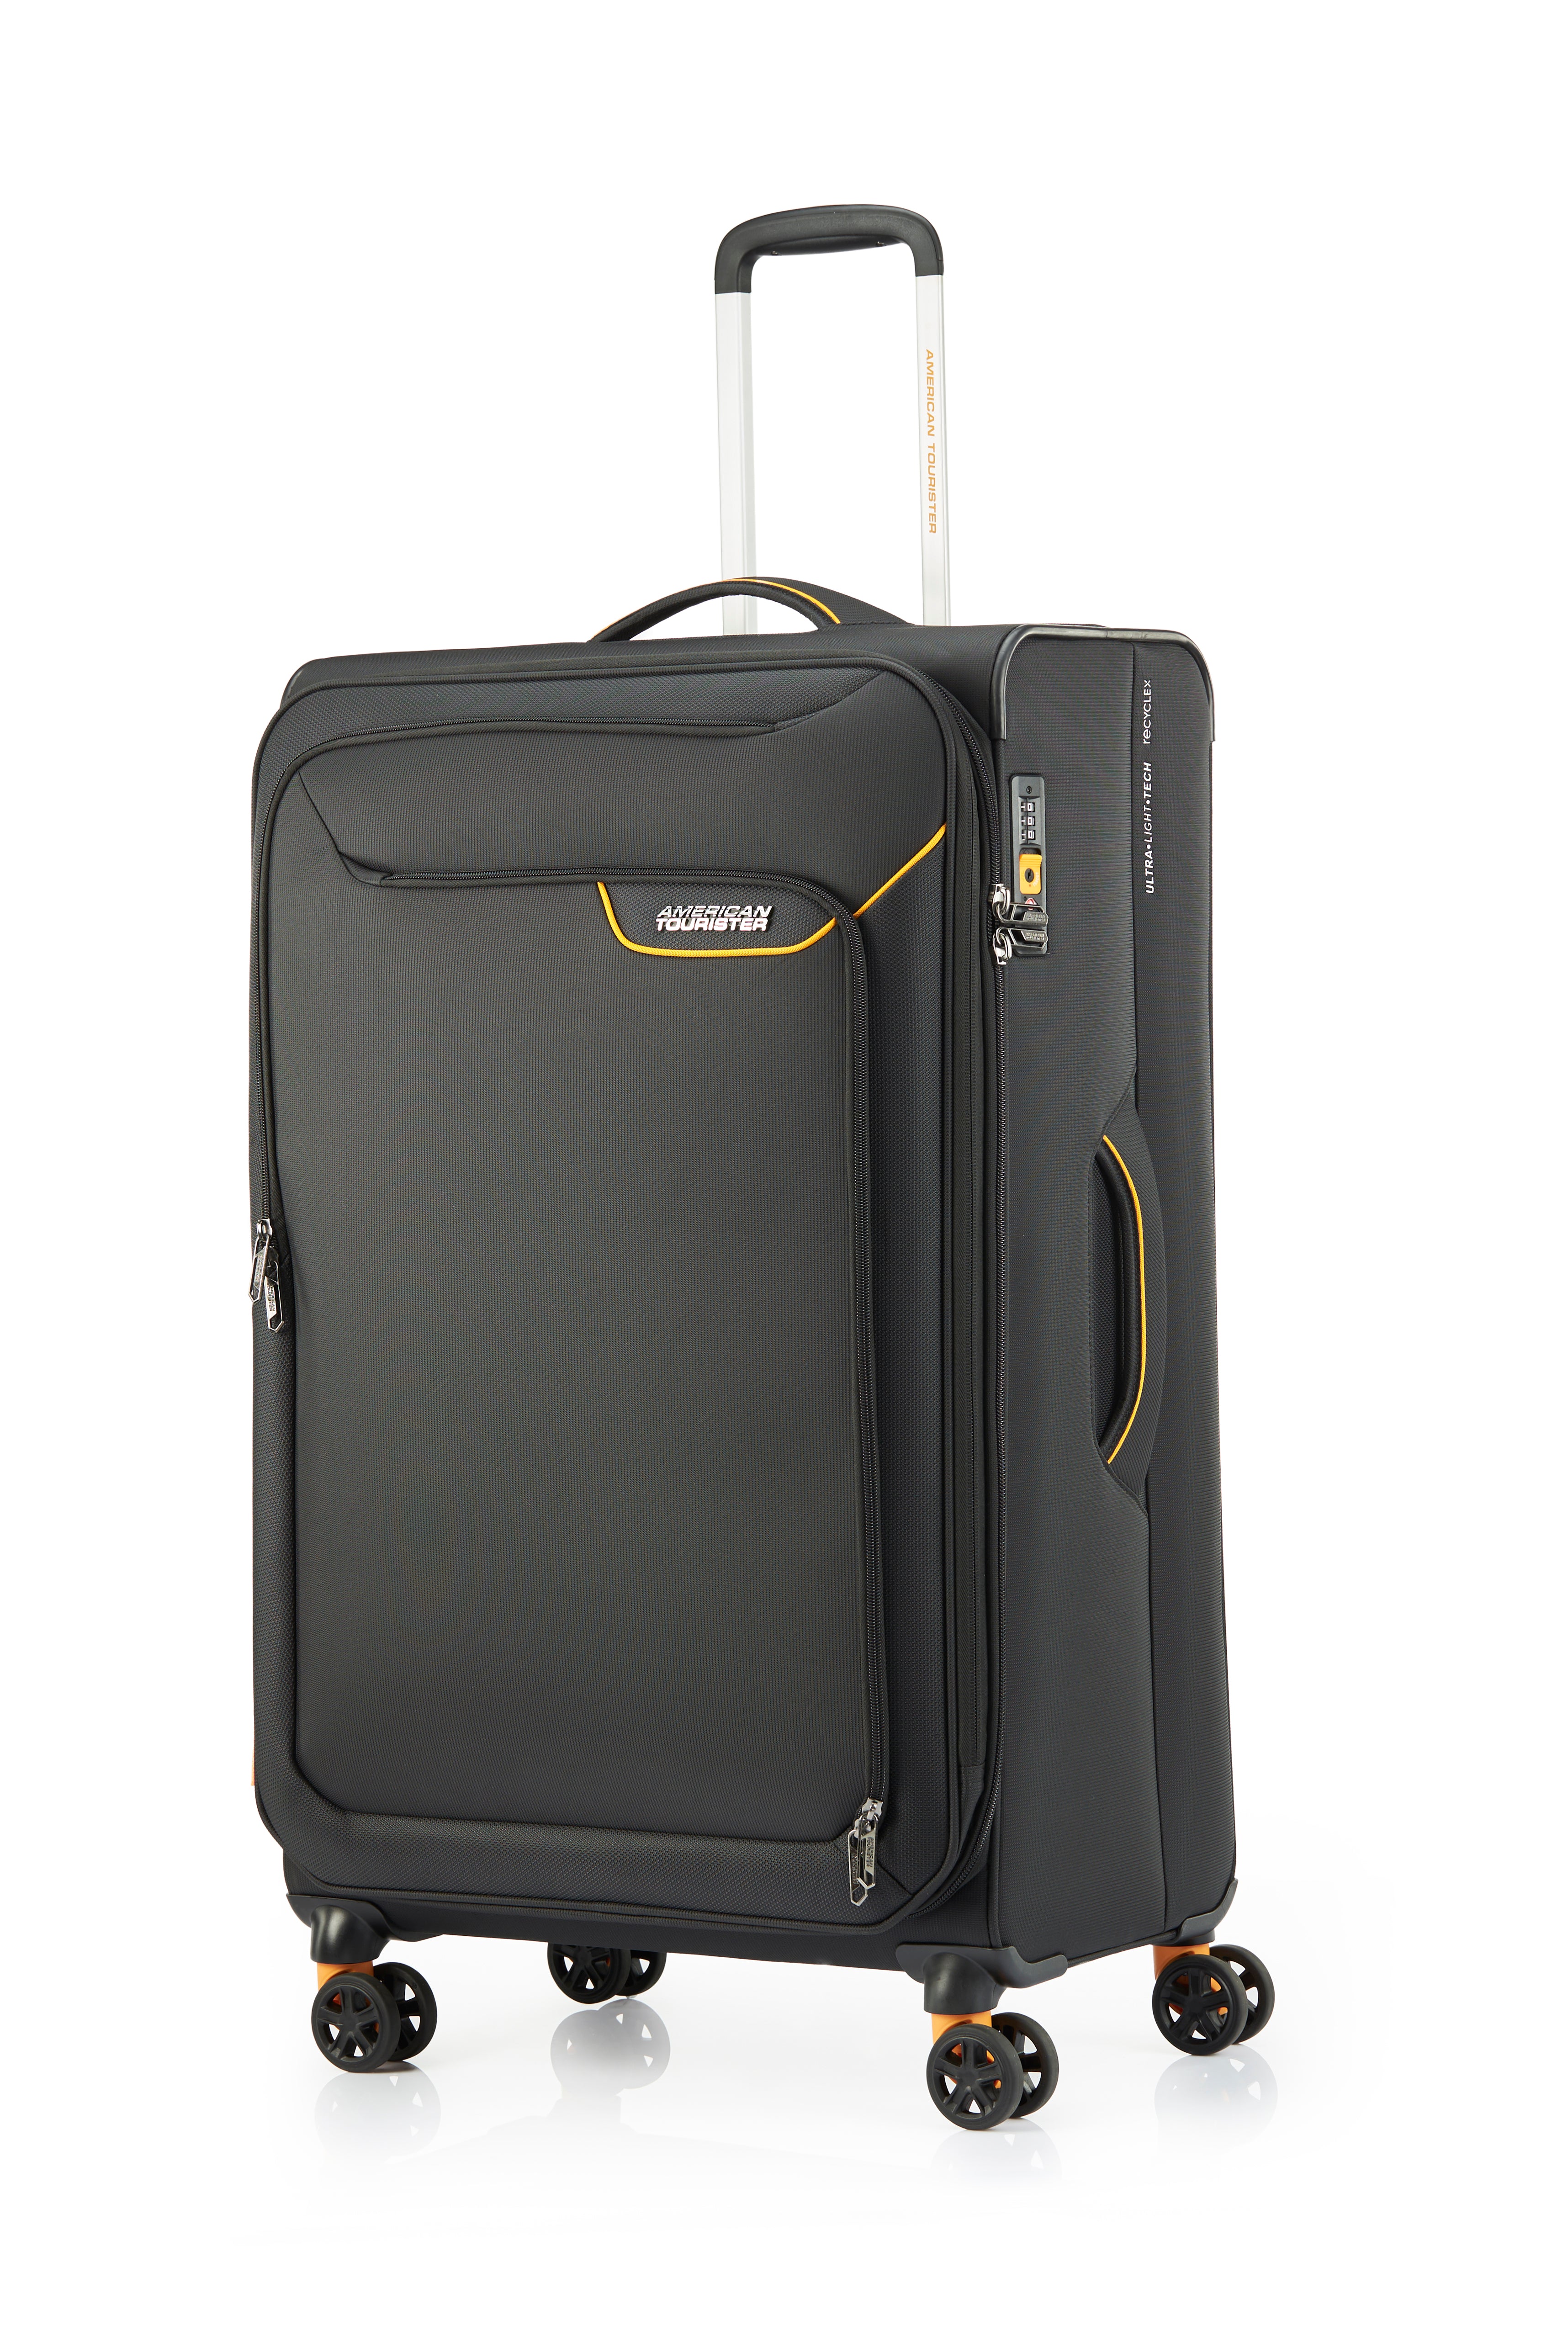 American Tourister - Applite ECO 82cm Large Suitcase - Black/Must